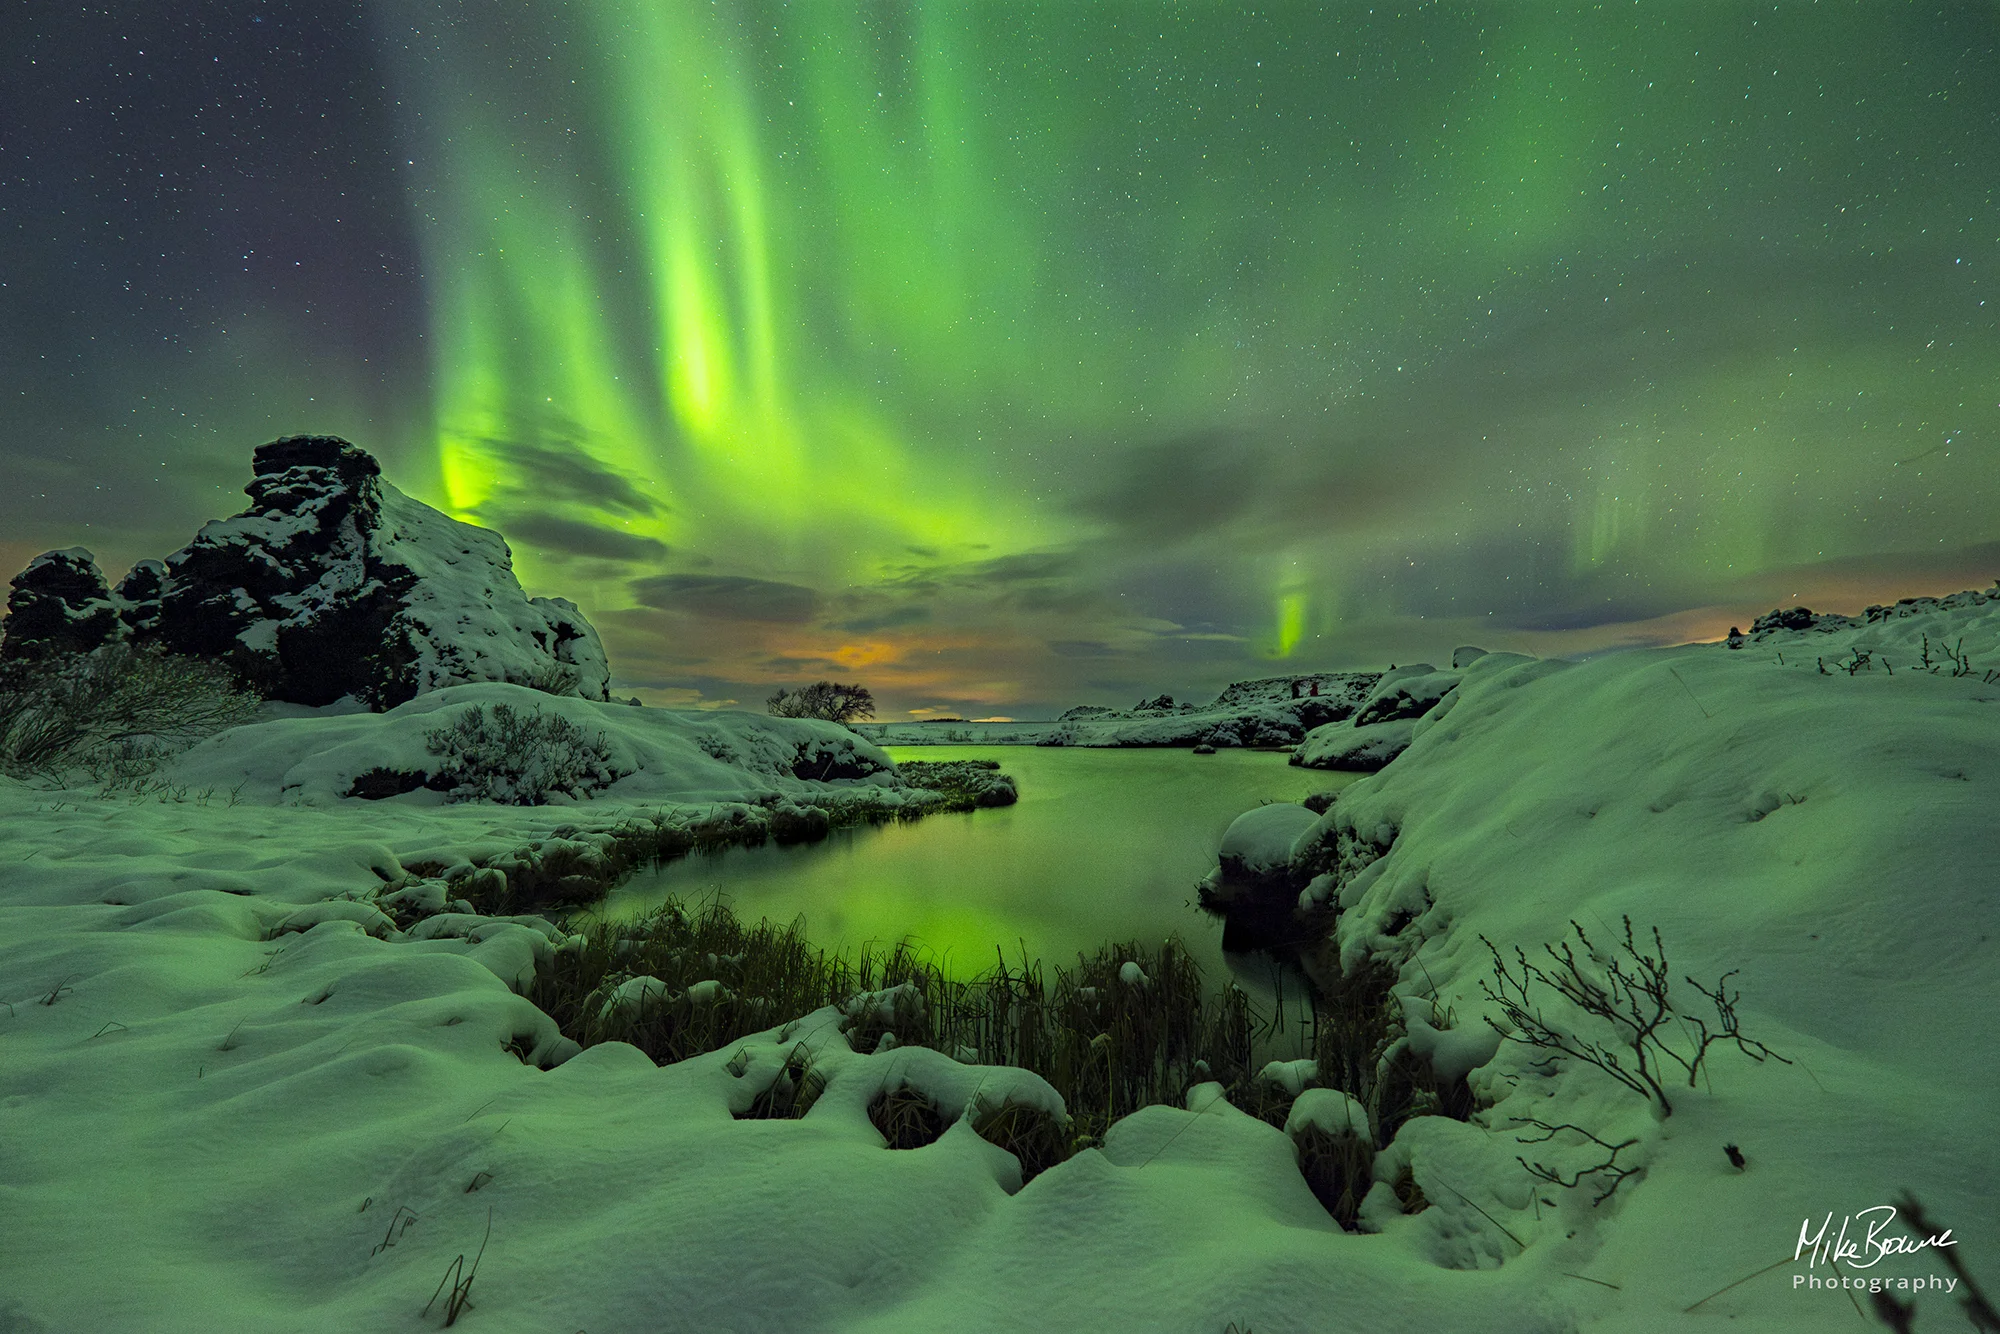 Green Aurora Borealis in sky above a pool of water surrounded by snow